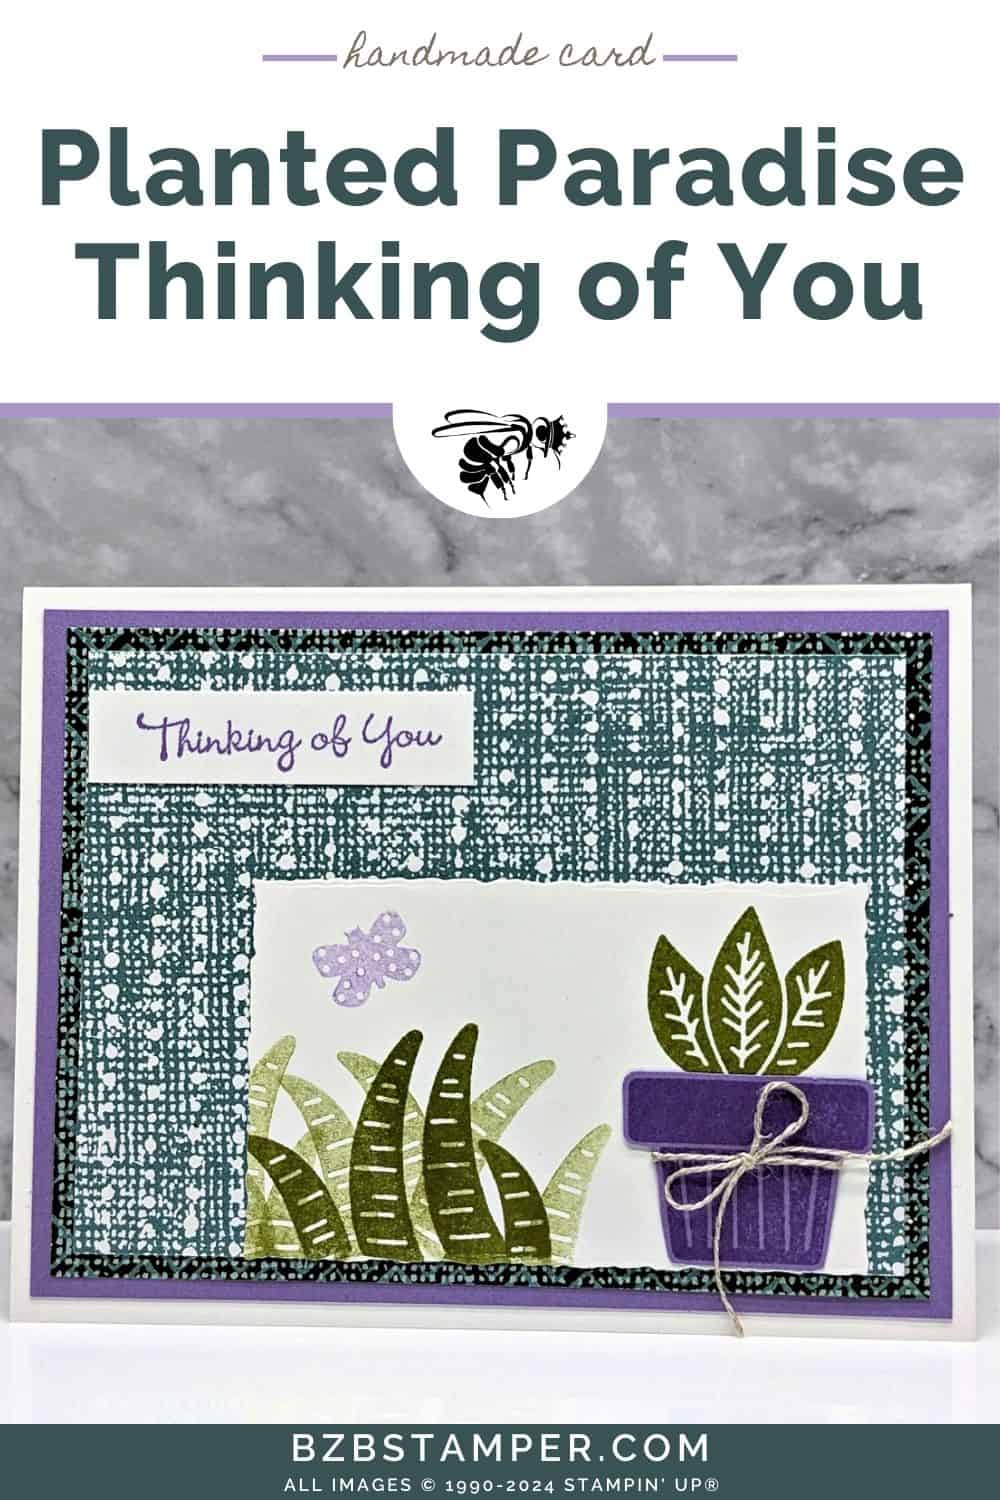 Planted Paradise Thinking of You Handmade Card in green and purple with pretty paper, a butterfly and a potted plant with foliage.